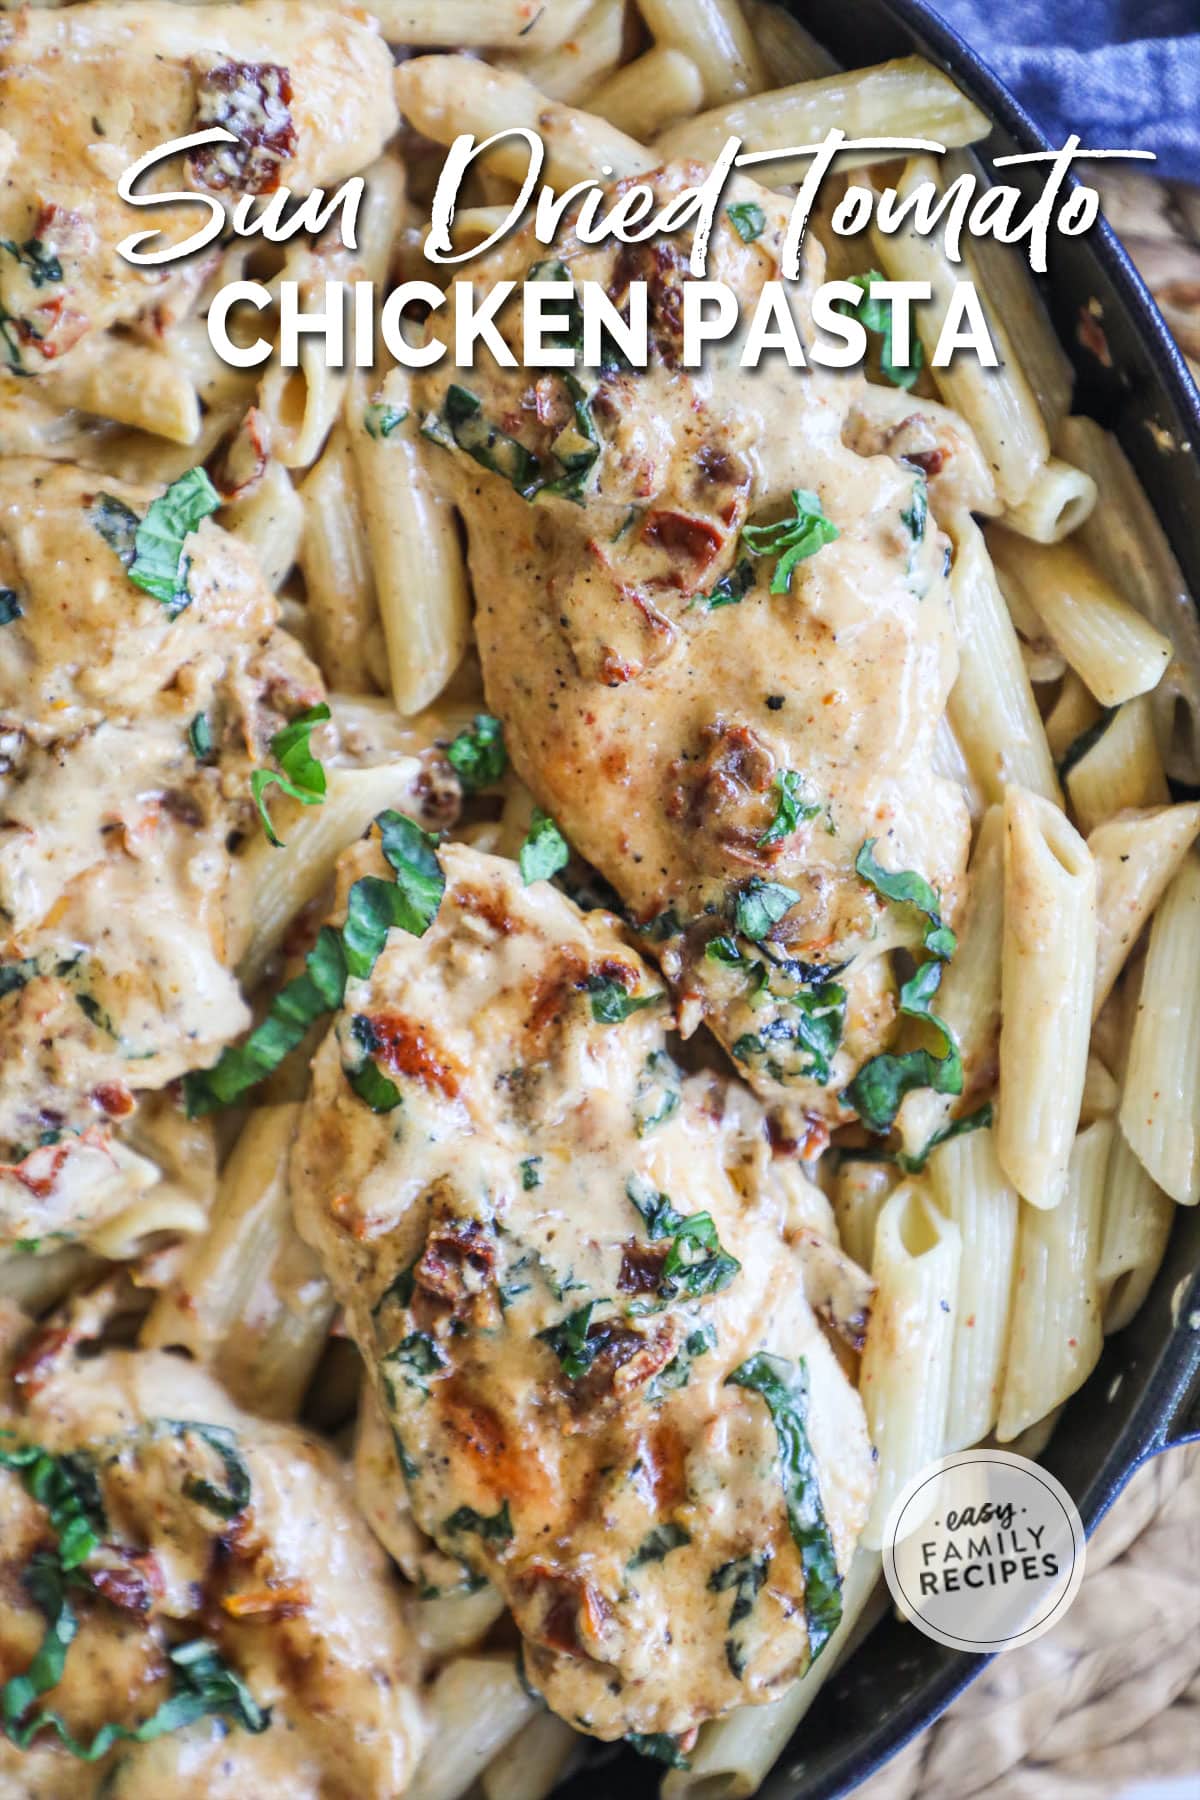 Pasta dish in a skillet with chicken on top and sun dried tomato and basil cream sauce.